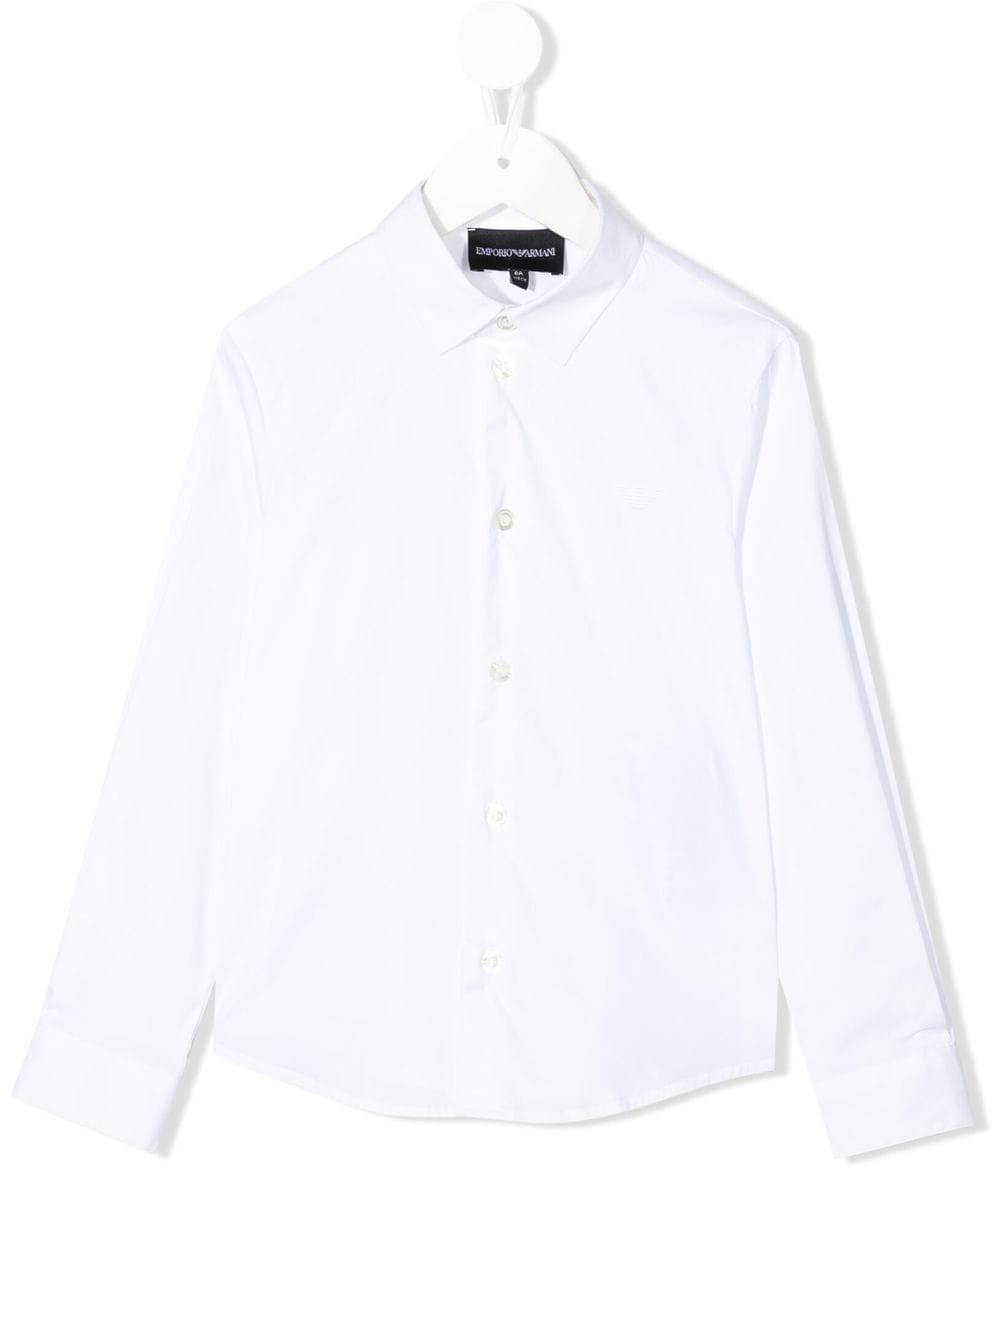 Image 2 of Emporio Armani Kids classic buttoned shirt